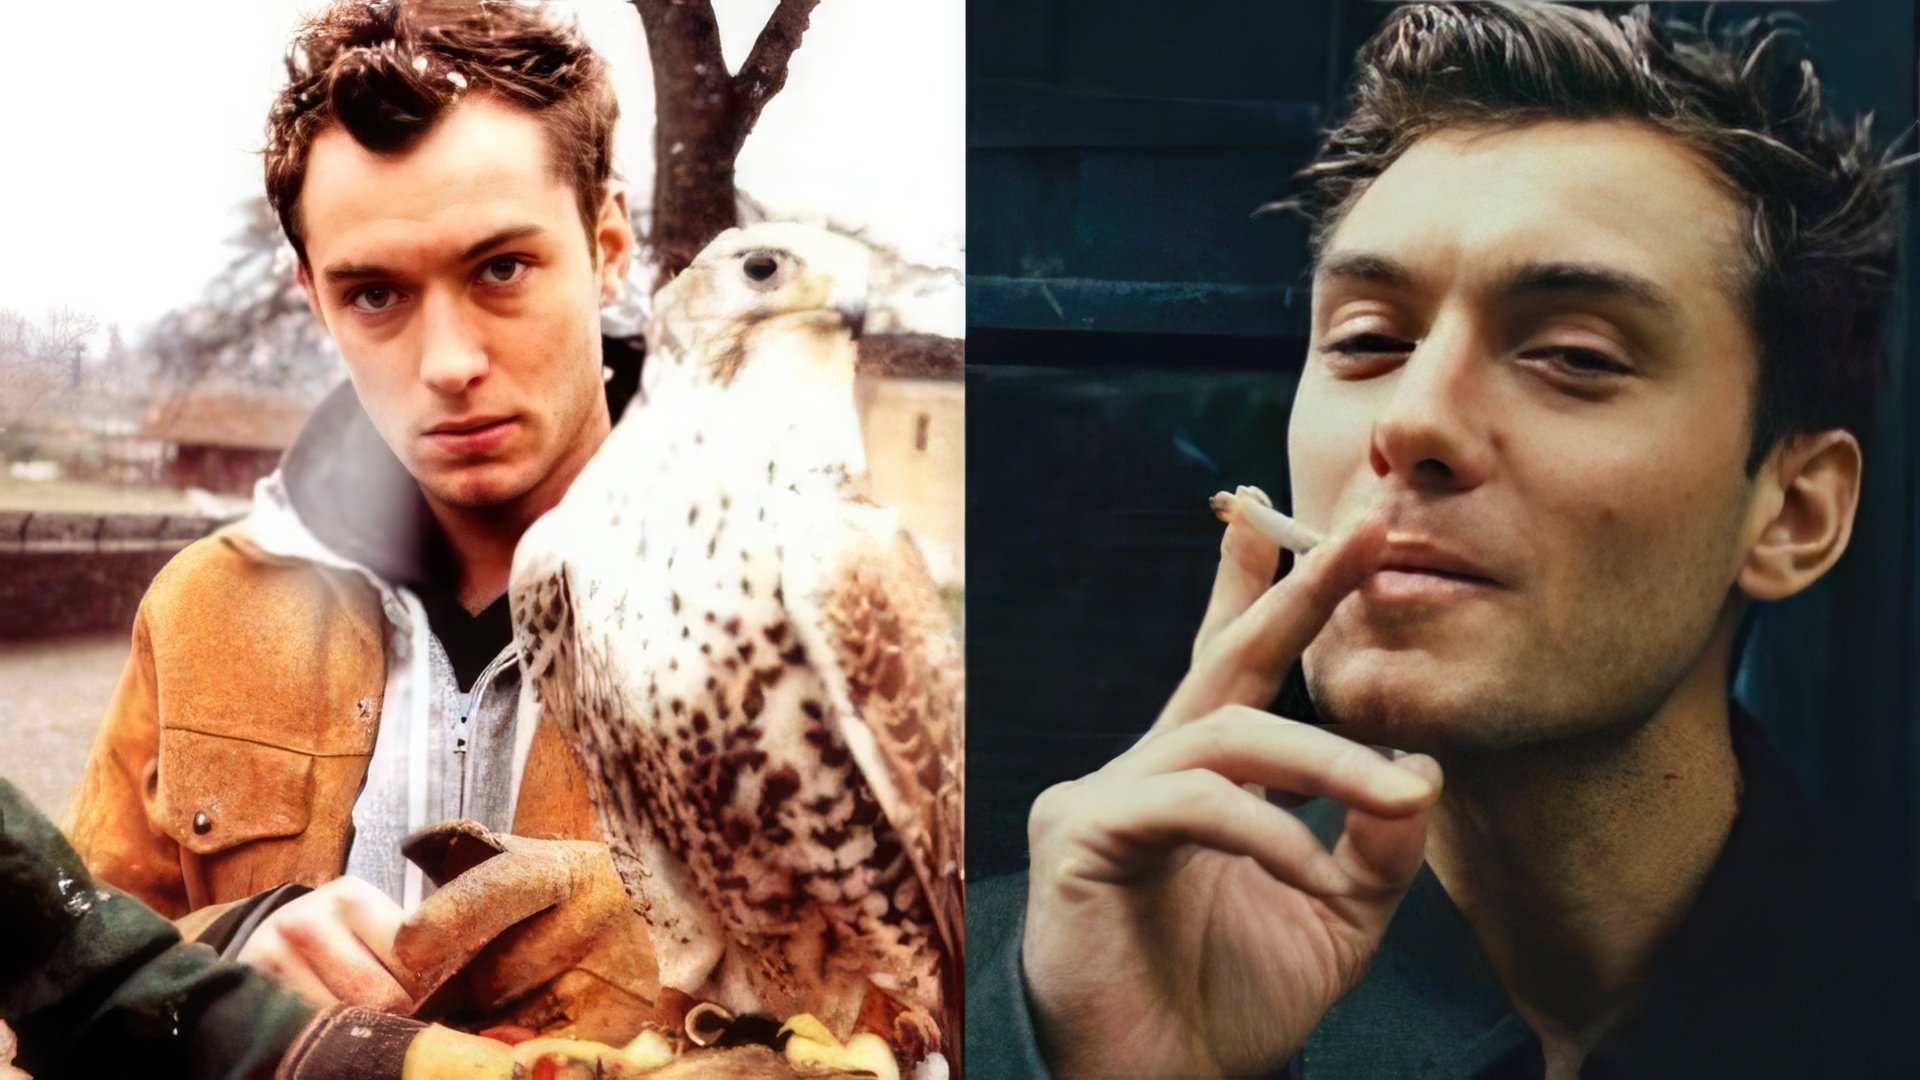 Younger Jude Law